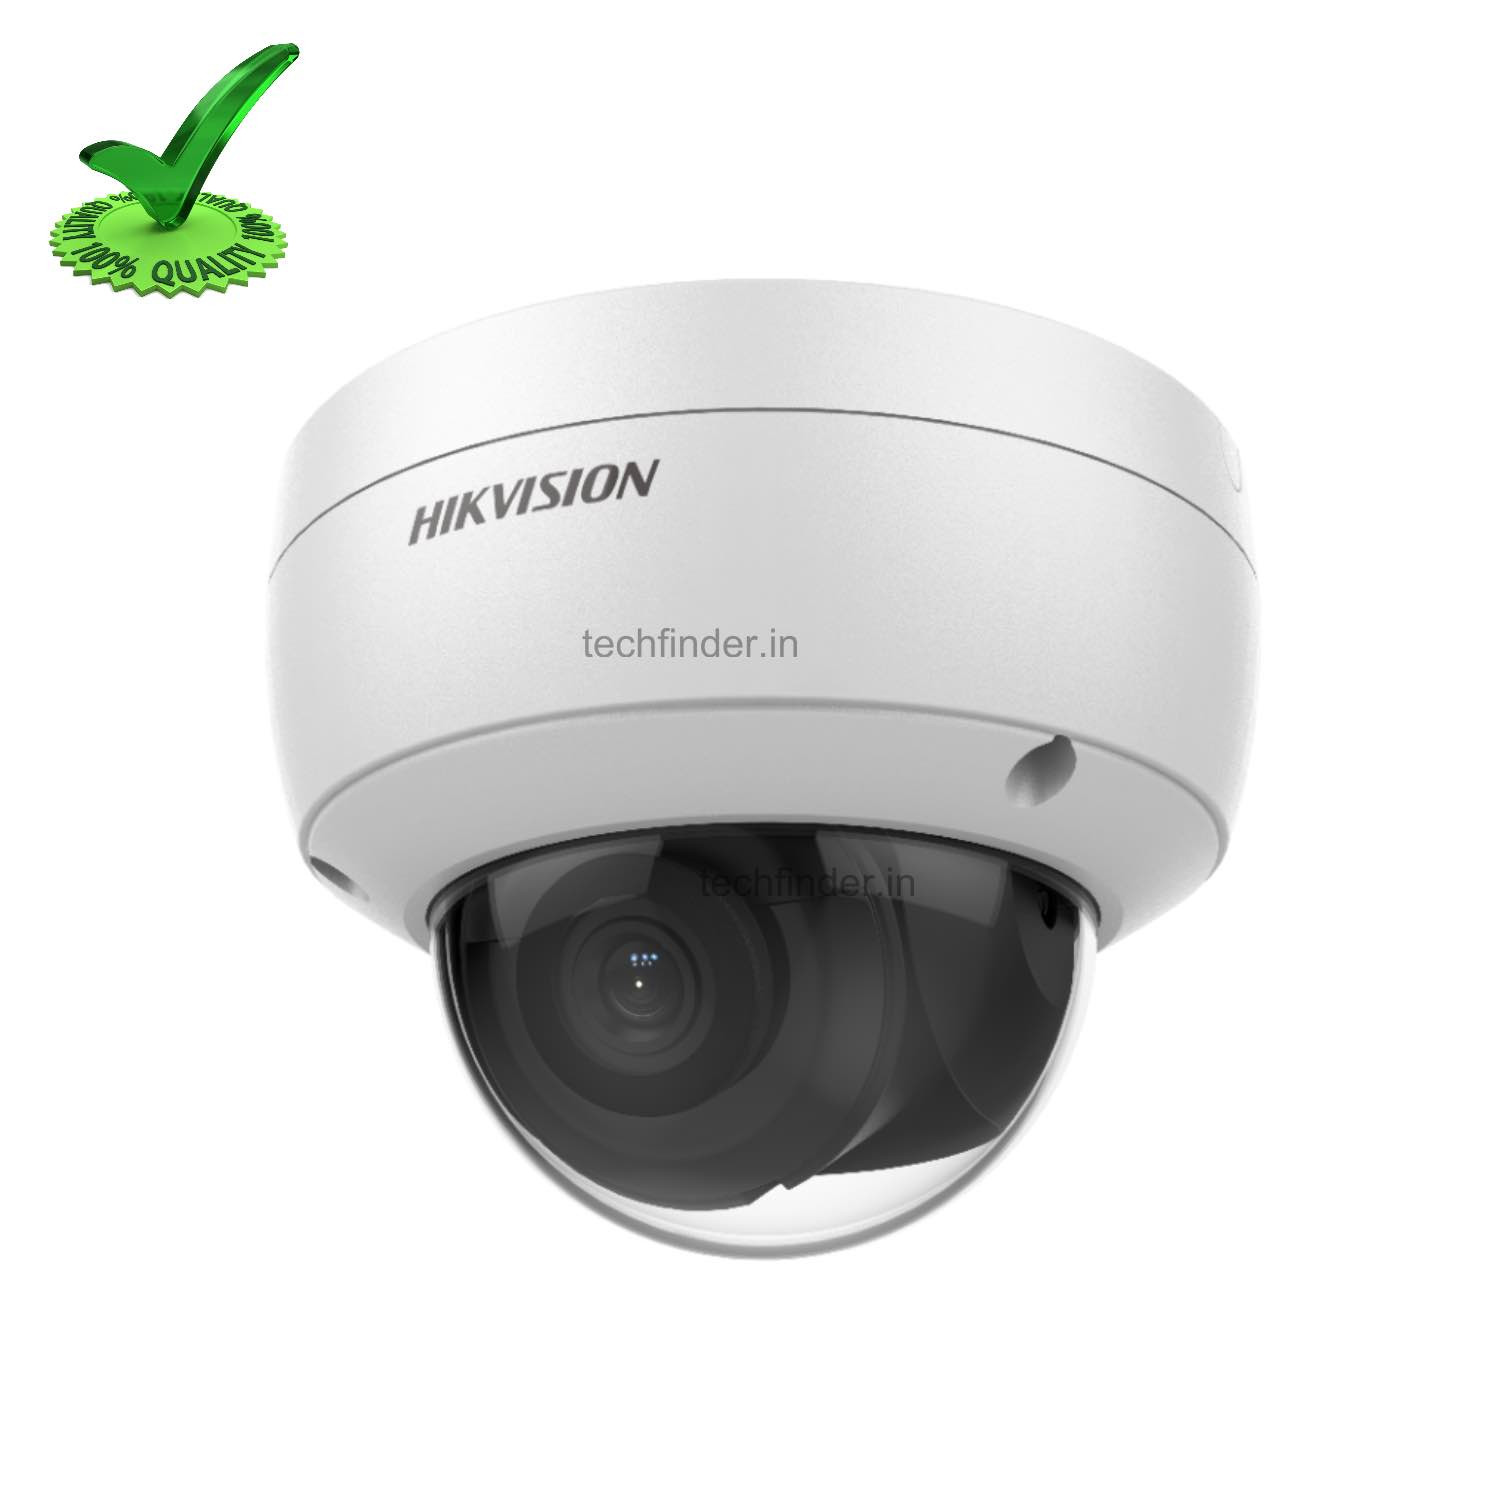 Hikvision DS-2CD2163G0-IU 6MP Fixed IP Dome Camera